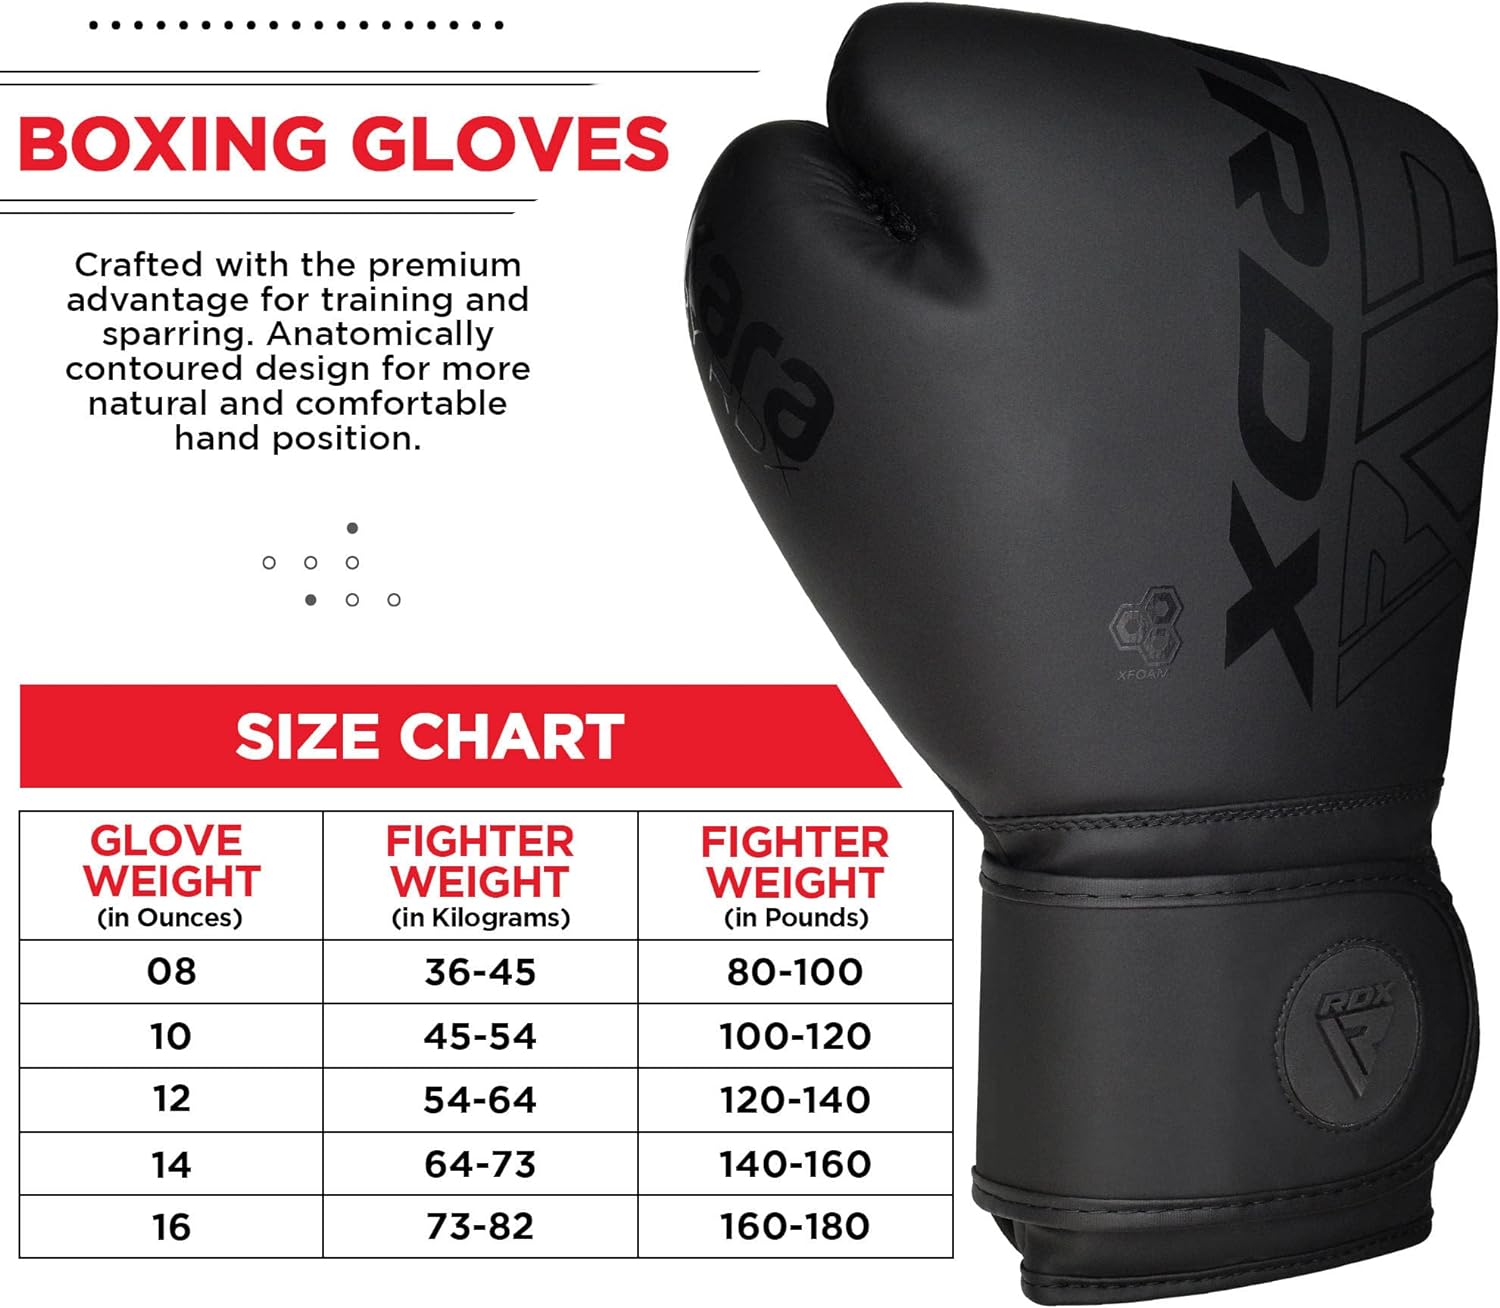 Eclipse Martial Art Supplies Training Gloves RDX Boxing Gloves Men Women, Pro Training Sparring, Maya Hide Leather Muay Thai MMA Kickboxing, Adult Heavy Punching Bag Gloves Mitts Focus Pad Workout, Ventilated Palm